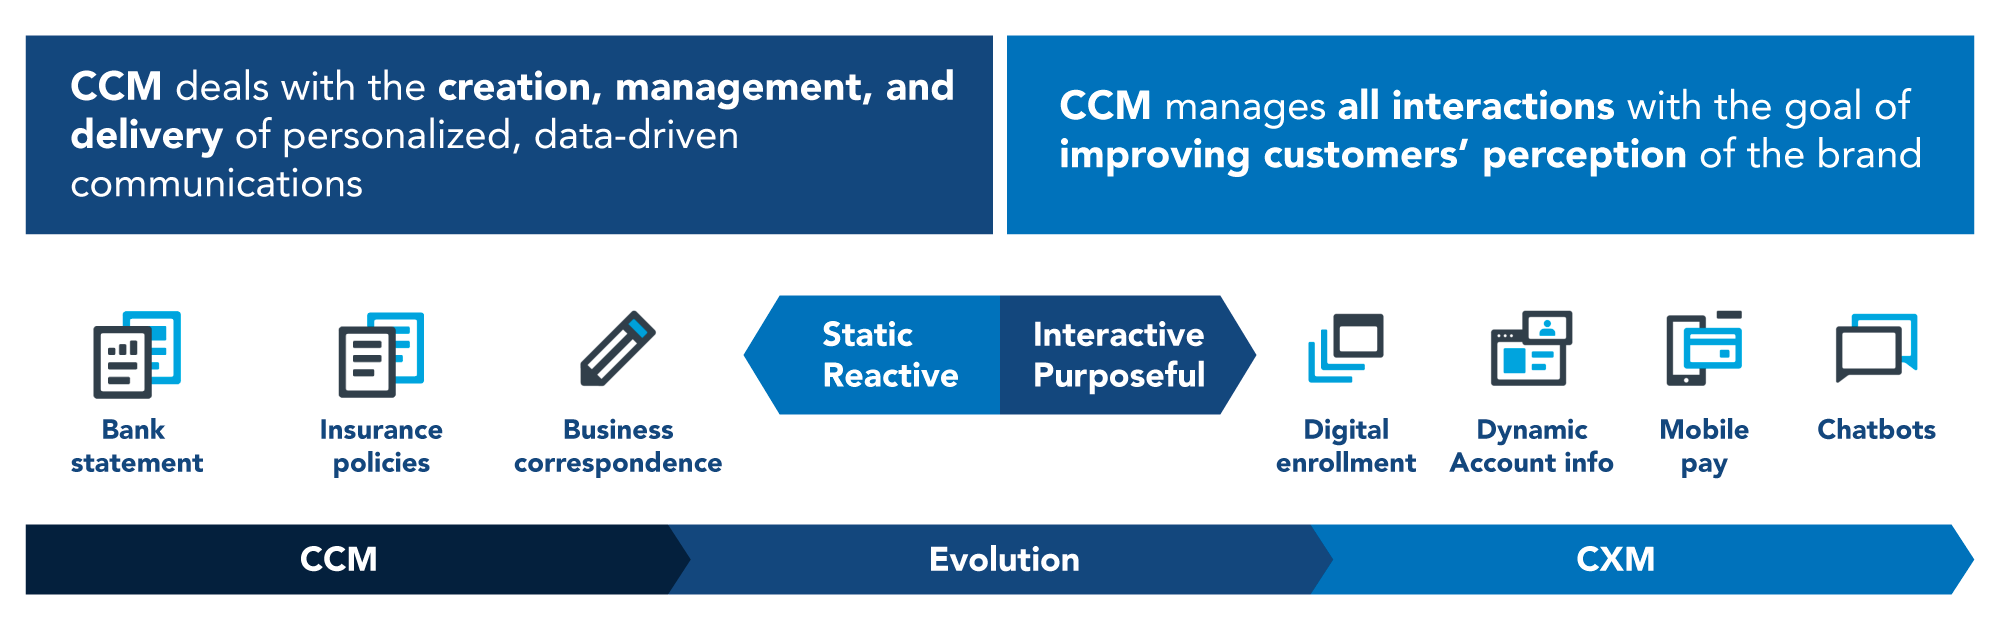 CCM deals with the creation, management, and delivery of personalized, data-driven communications. CXM manages all interactions with the goal of improving customers' perception of the brand